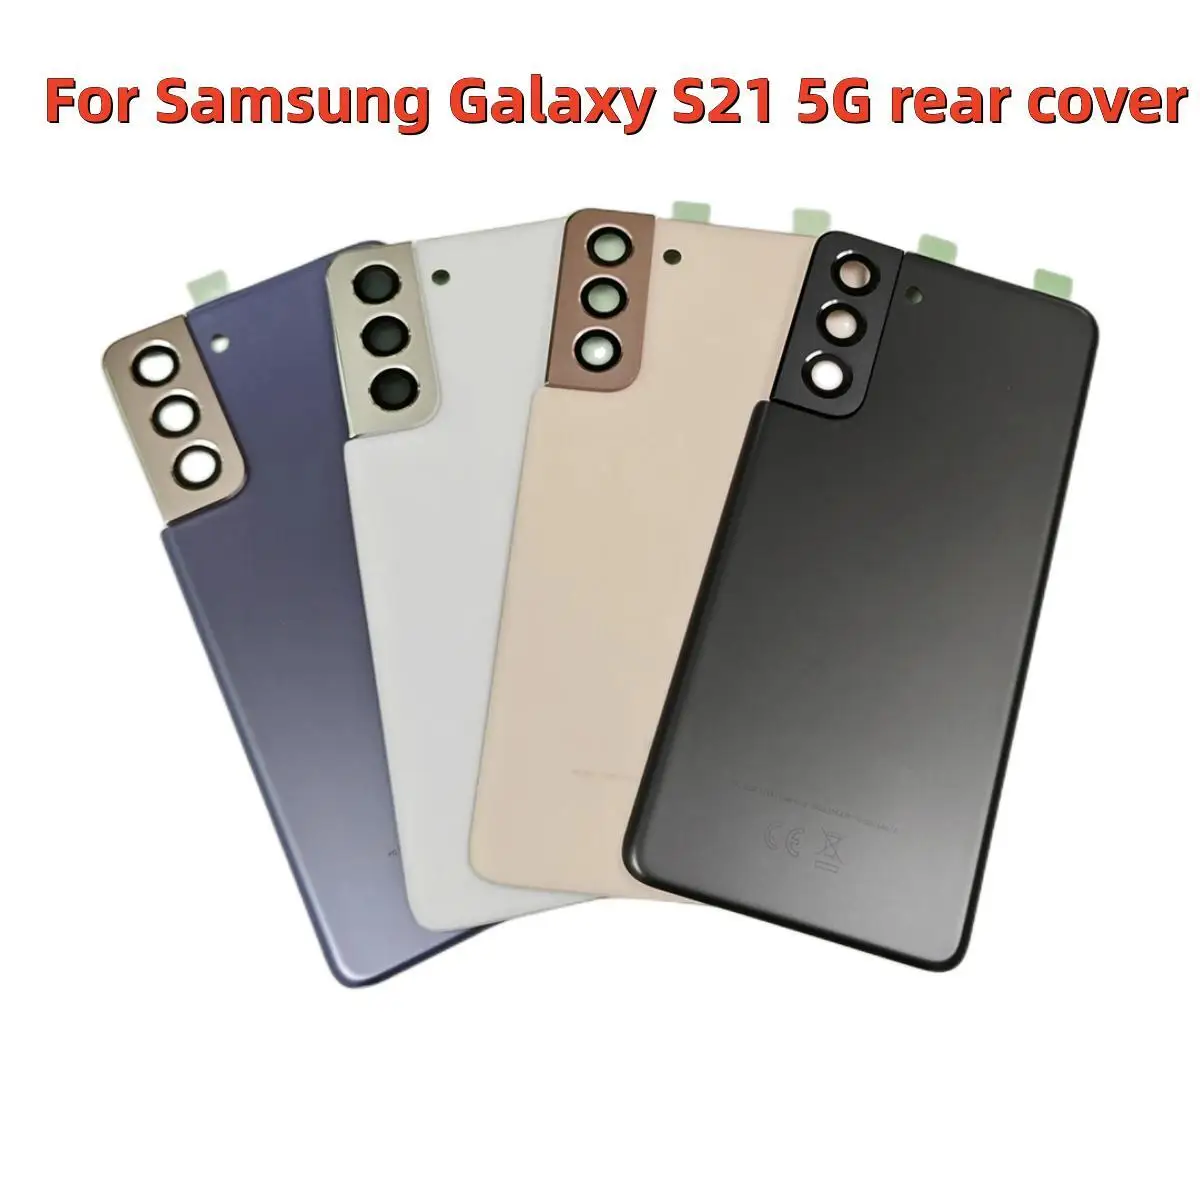 

Original S21 5G SM-G991 Back Cover For Samsung Galaxy S21 5G Back Door Replacement Battery Case, Rear Housing Cover +Camera Lens